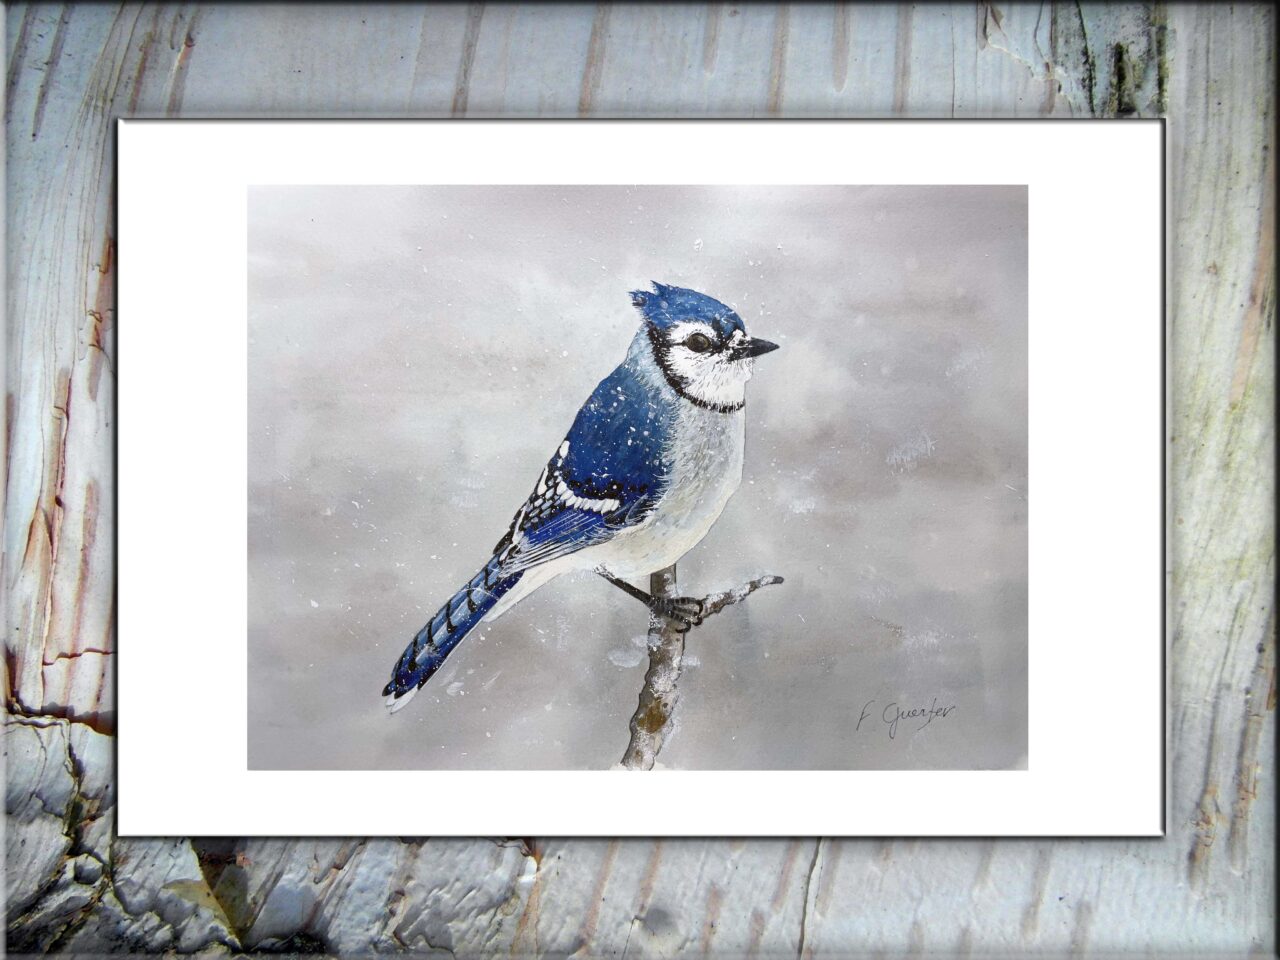 "Blue Jay under the snow" by Fabrice Guerber